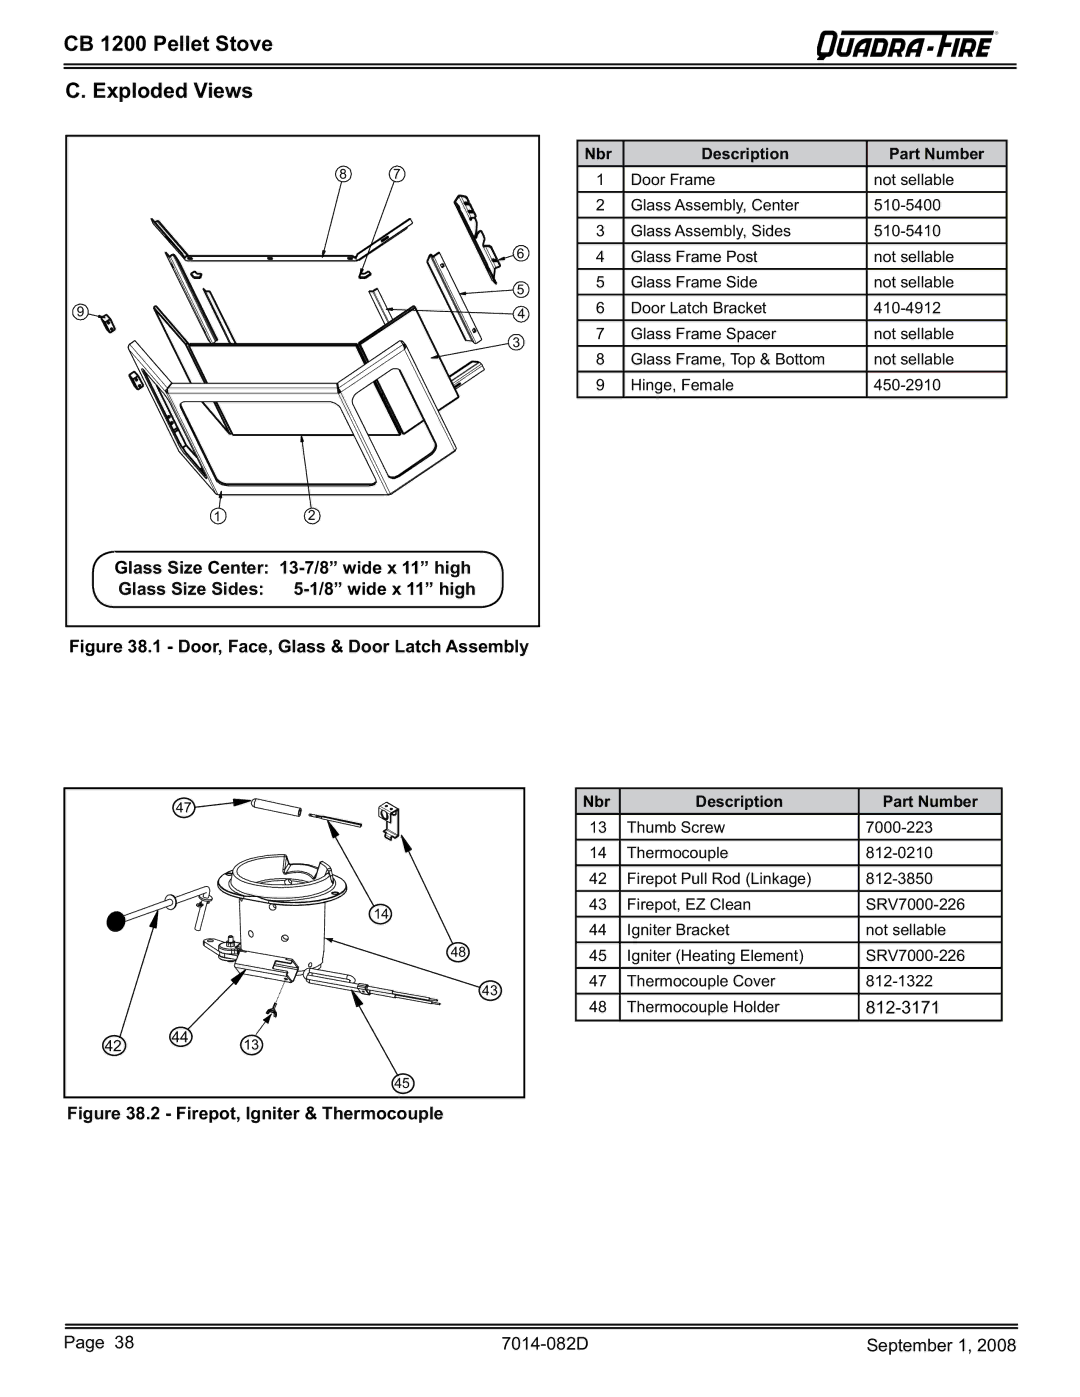 Hearth and Home Technologies CB1200-B CB 1200 Pellet Stove Exploded Views, Glass Size Center 13-7/8 wide x 11 high 